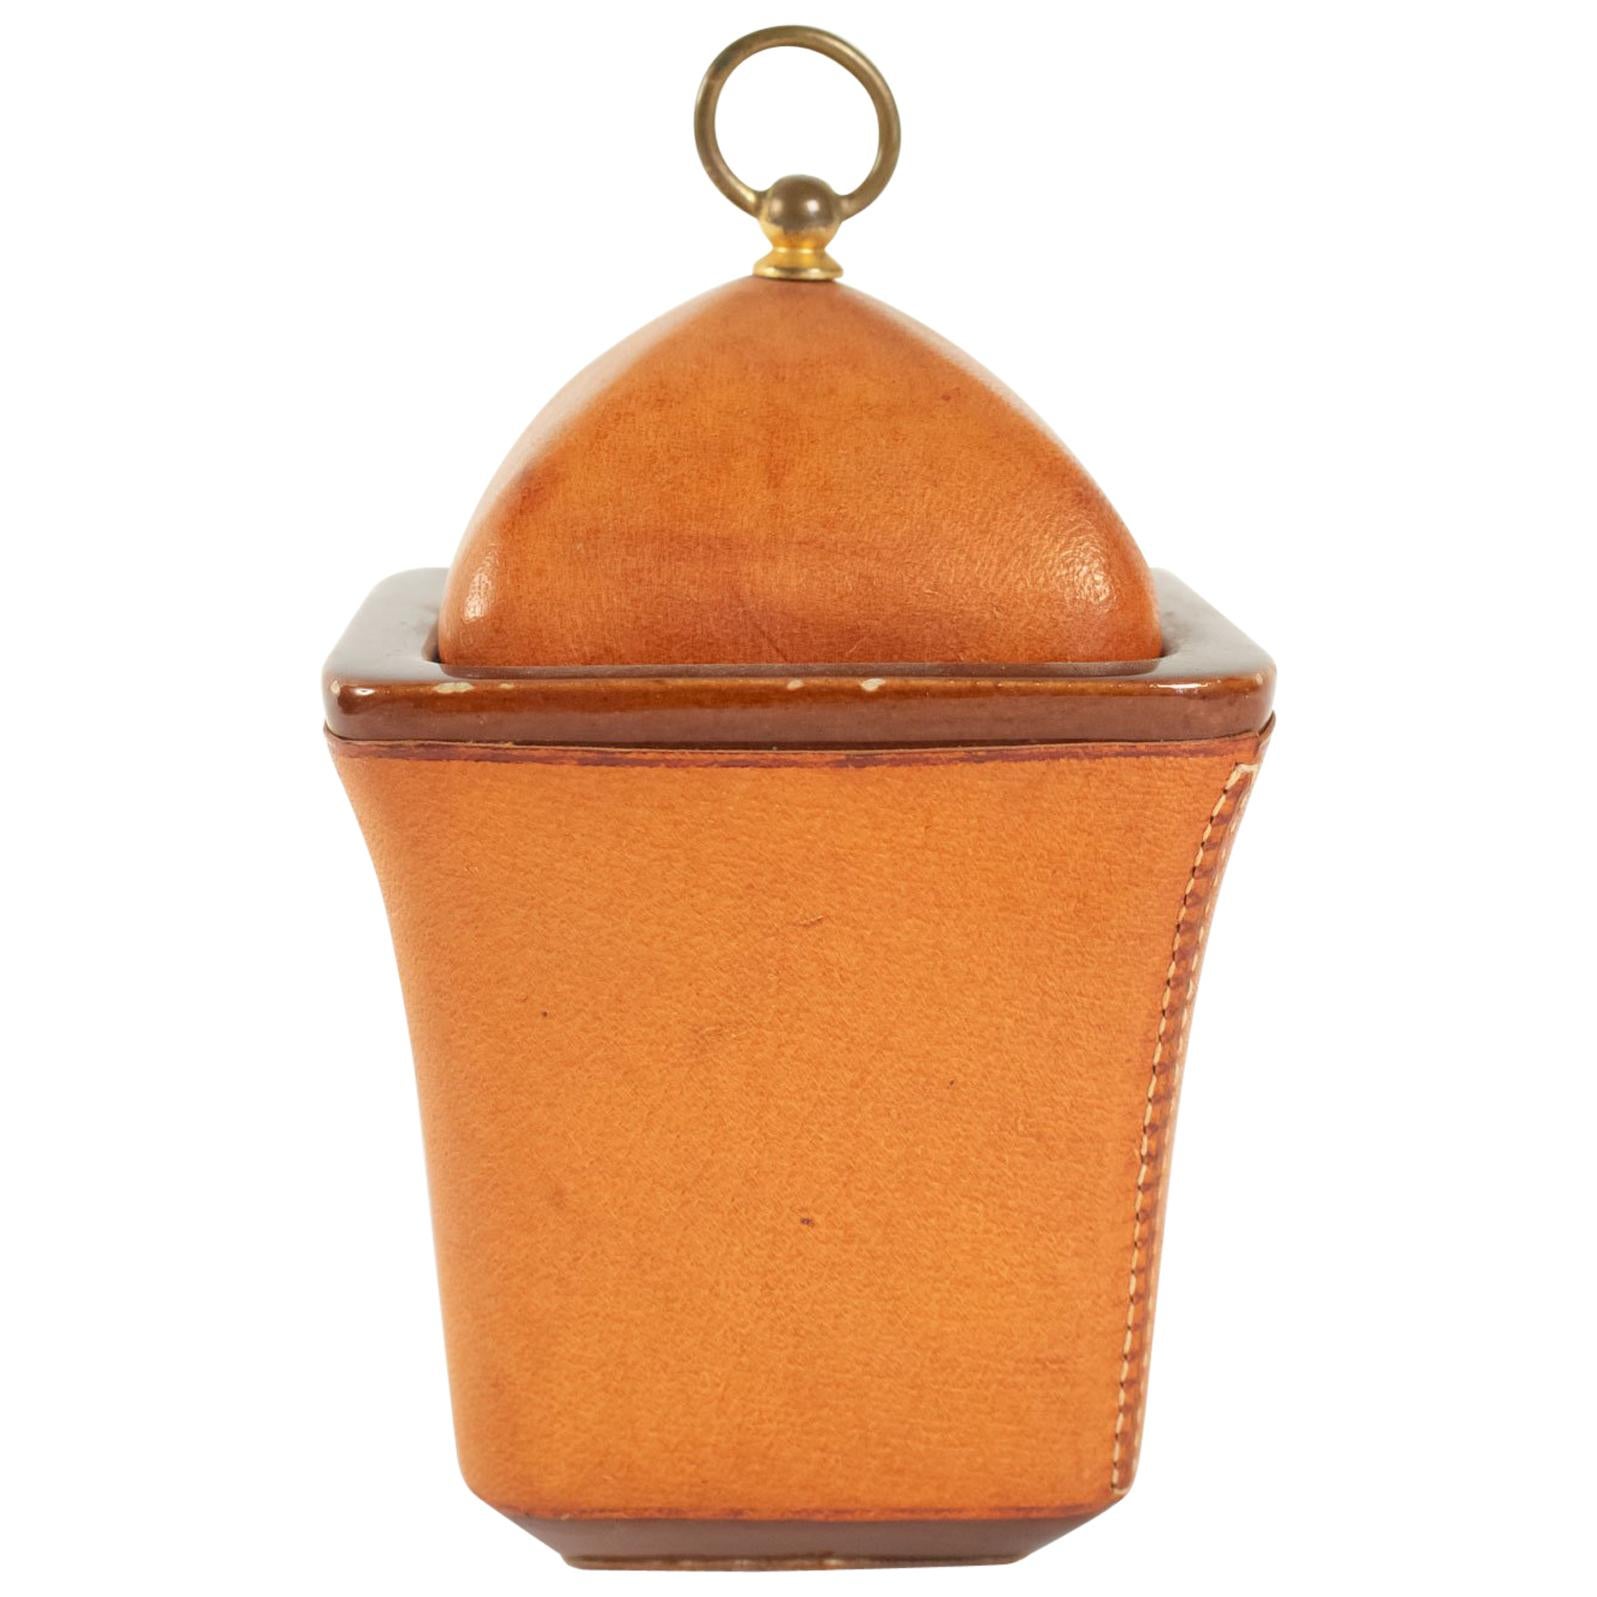 Tobacco Pot, Leather Sheathed from the Maison Longchamp Brand in Paris